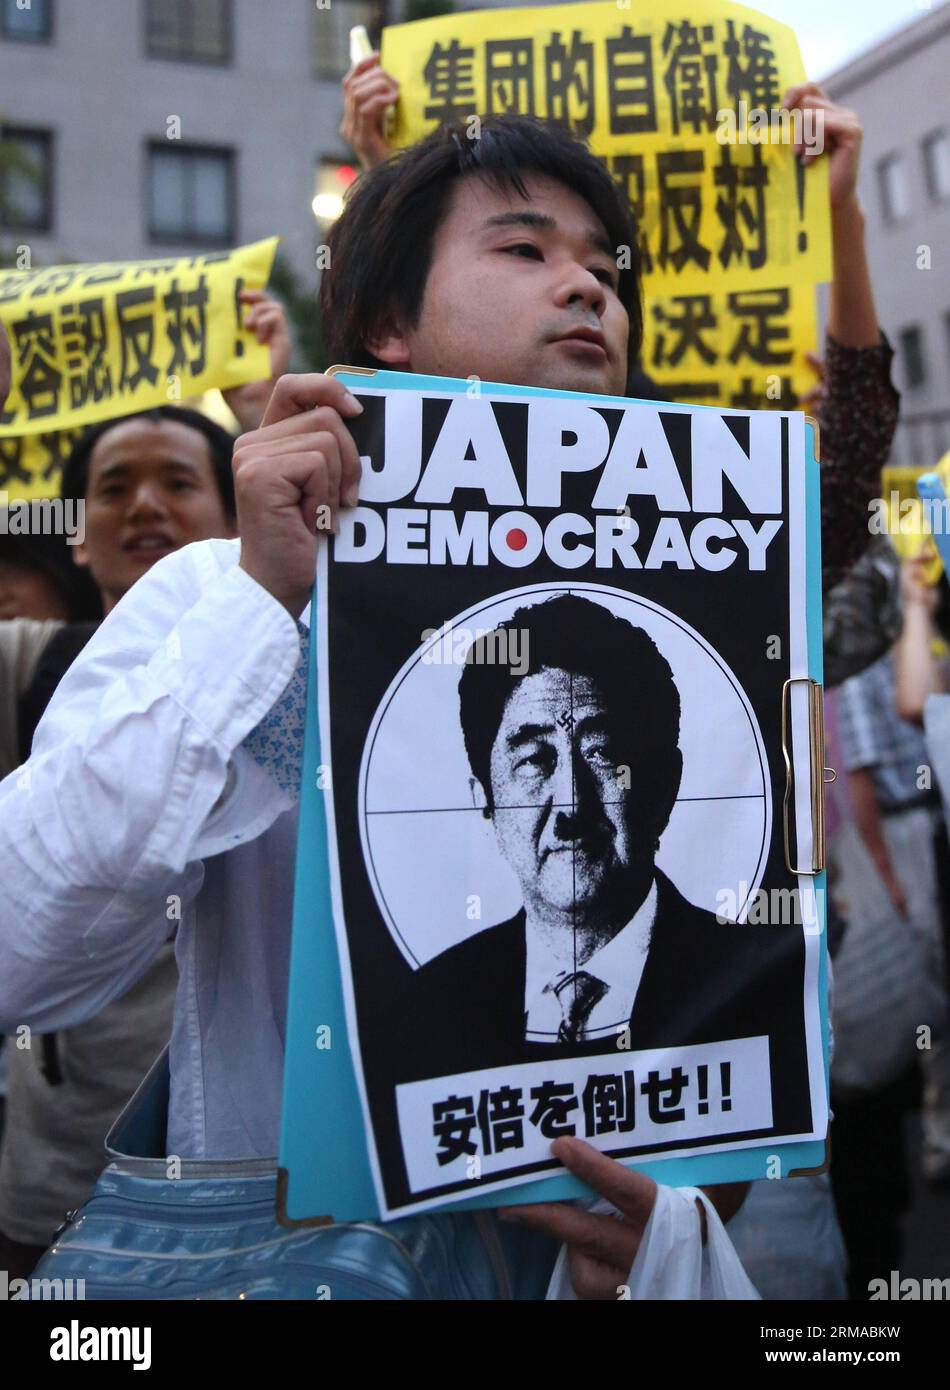 (140630) -- TOKYO, June 30, 2014 (Xinhua) -- A protester holds a caricature of Japanese Prime Minister Shinzo Abe during a rally to protest against the attempt to exercise the rights to collective self-defense in front of the Prime Minister s official residence in Tokyo, Japan, June 30, 2014. Thousands of Japanese people gathered here Monday, protesting against Japanese Prime Minister Shinzo Abe s attempt to allow Japan s Self-Defense Forces (SDF) to exercise the rights to collective self-defense. The Japanese government sought to get a green light from the Cabinet on July 1 for a resolution t Stock Photo